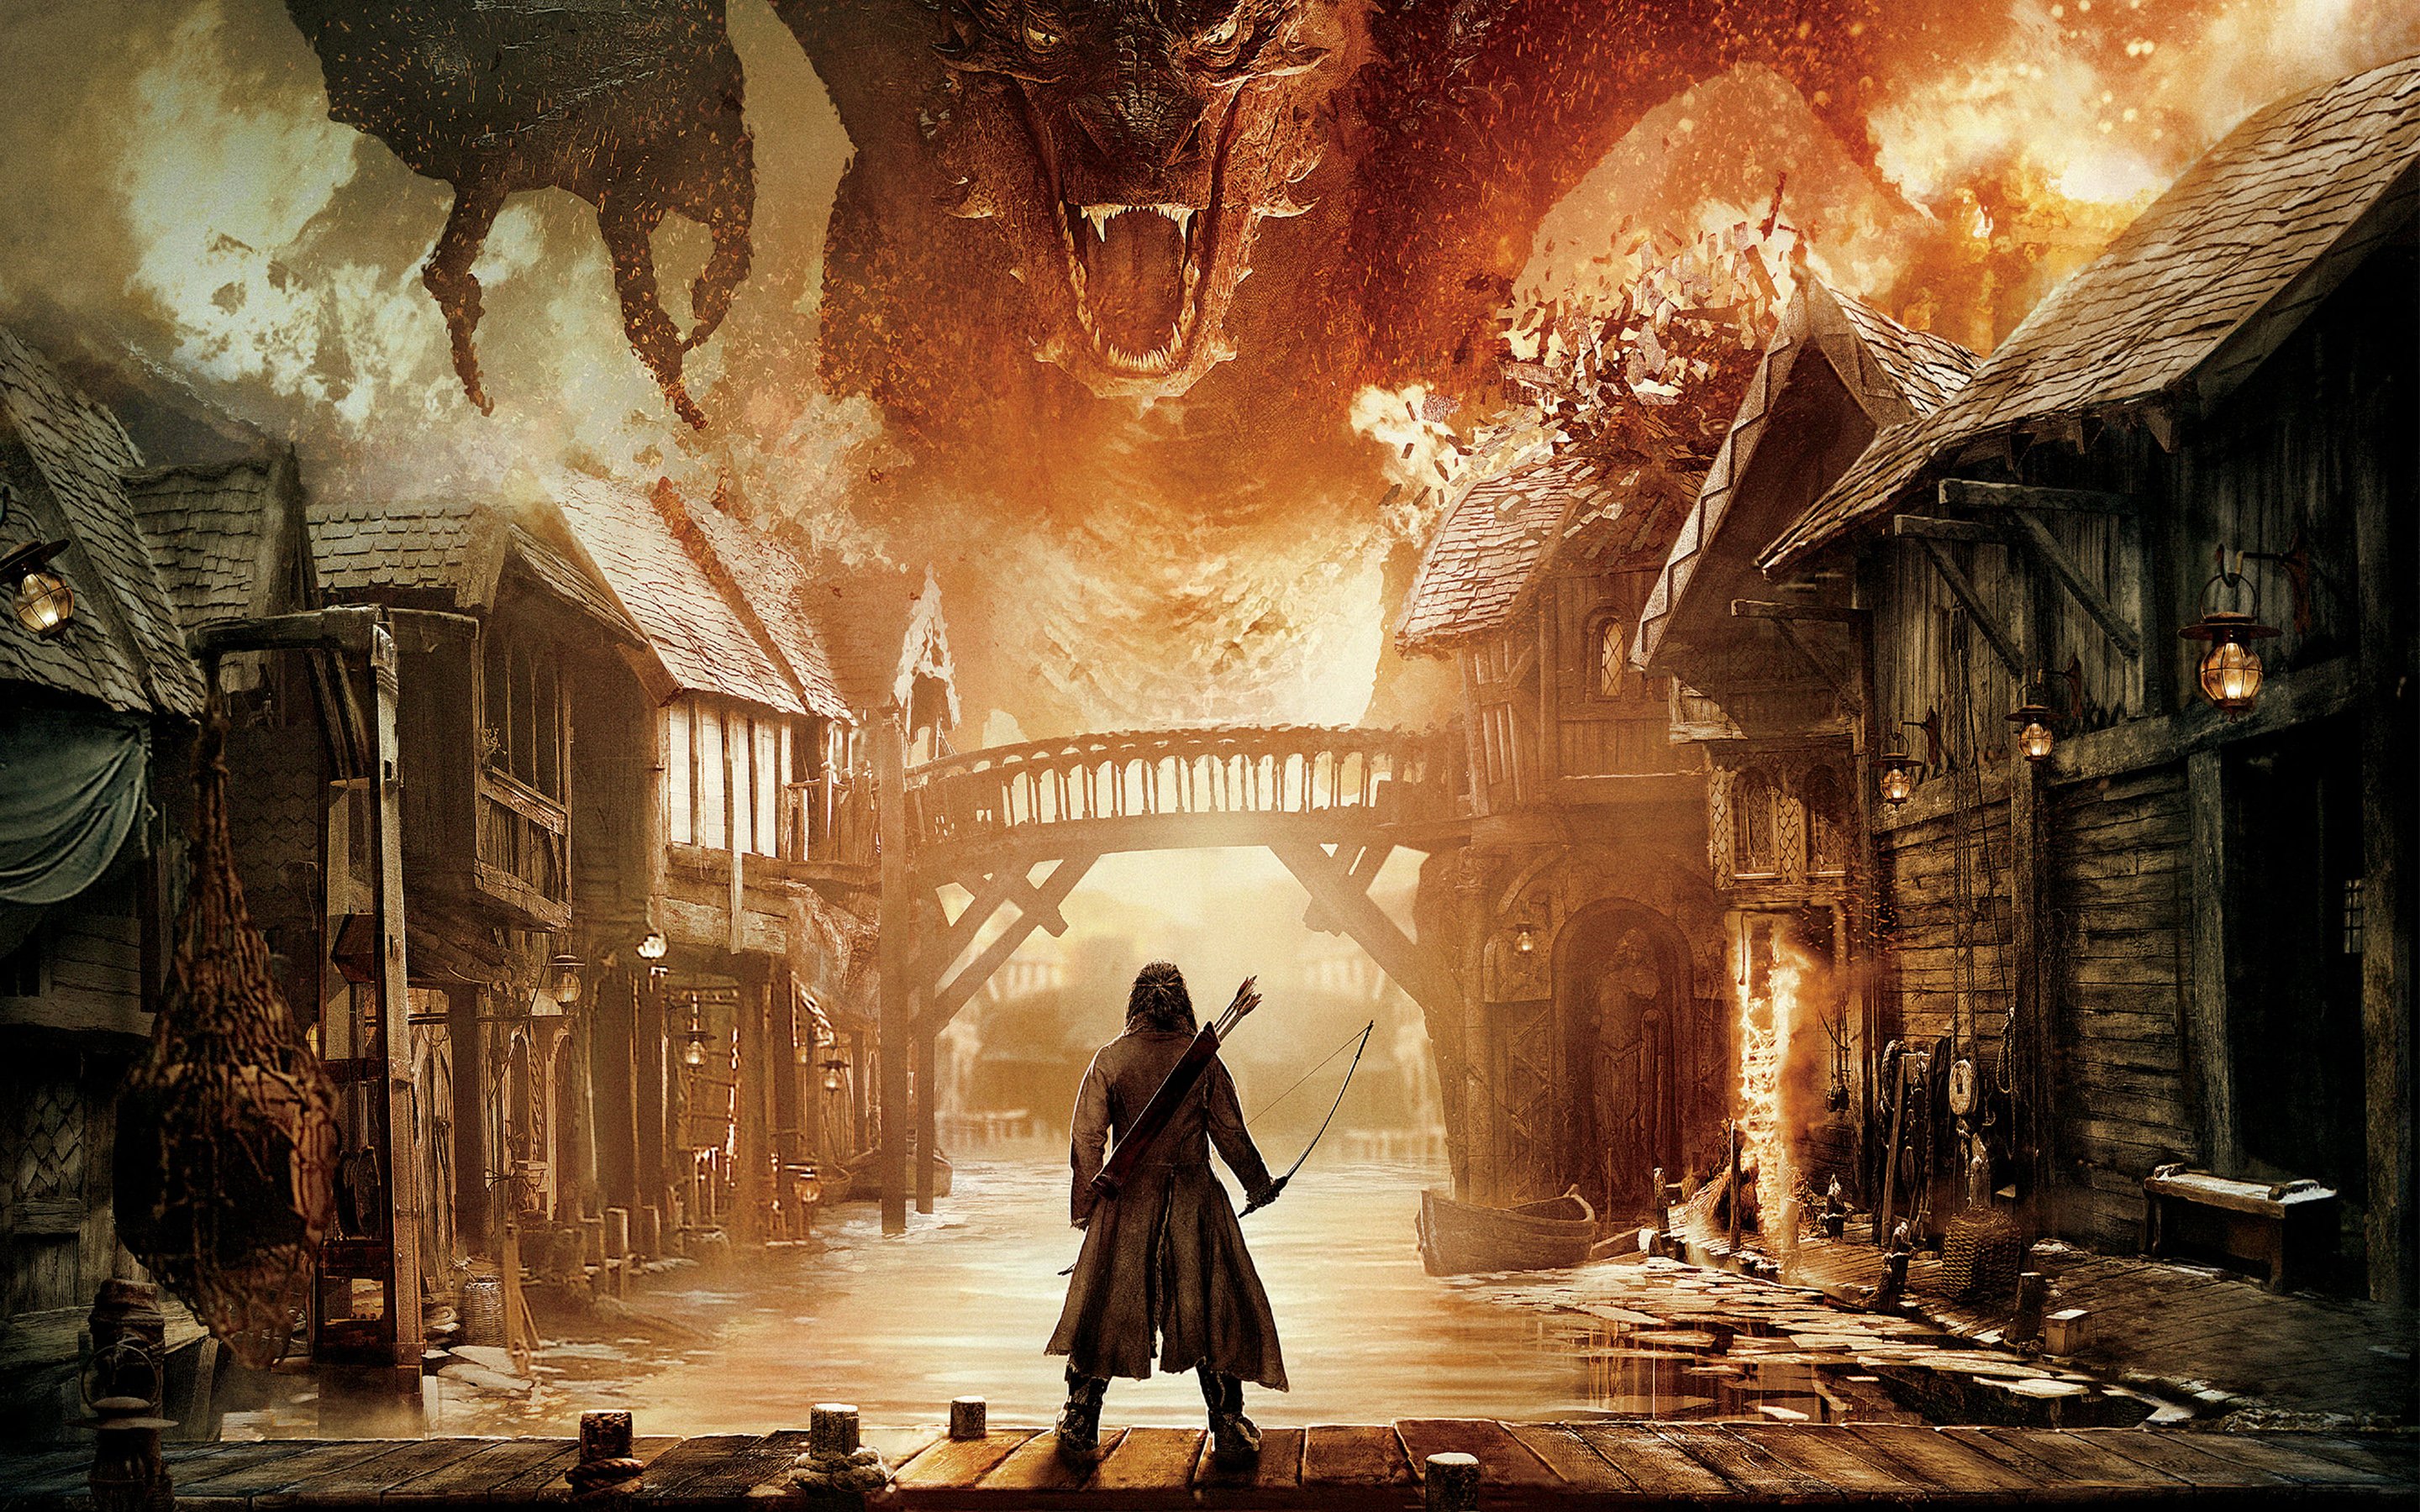 The Hobbit The Battle of the Five Armies Wallpapers HD Wallpapers 2880x1800